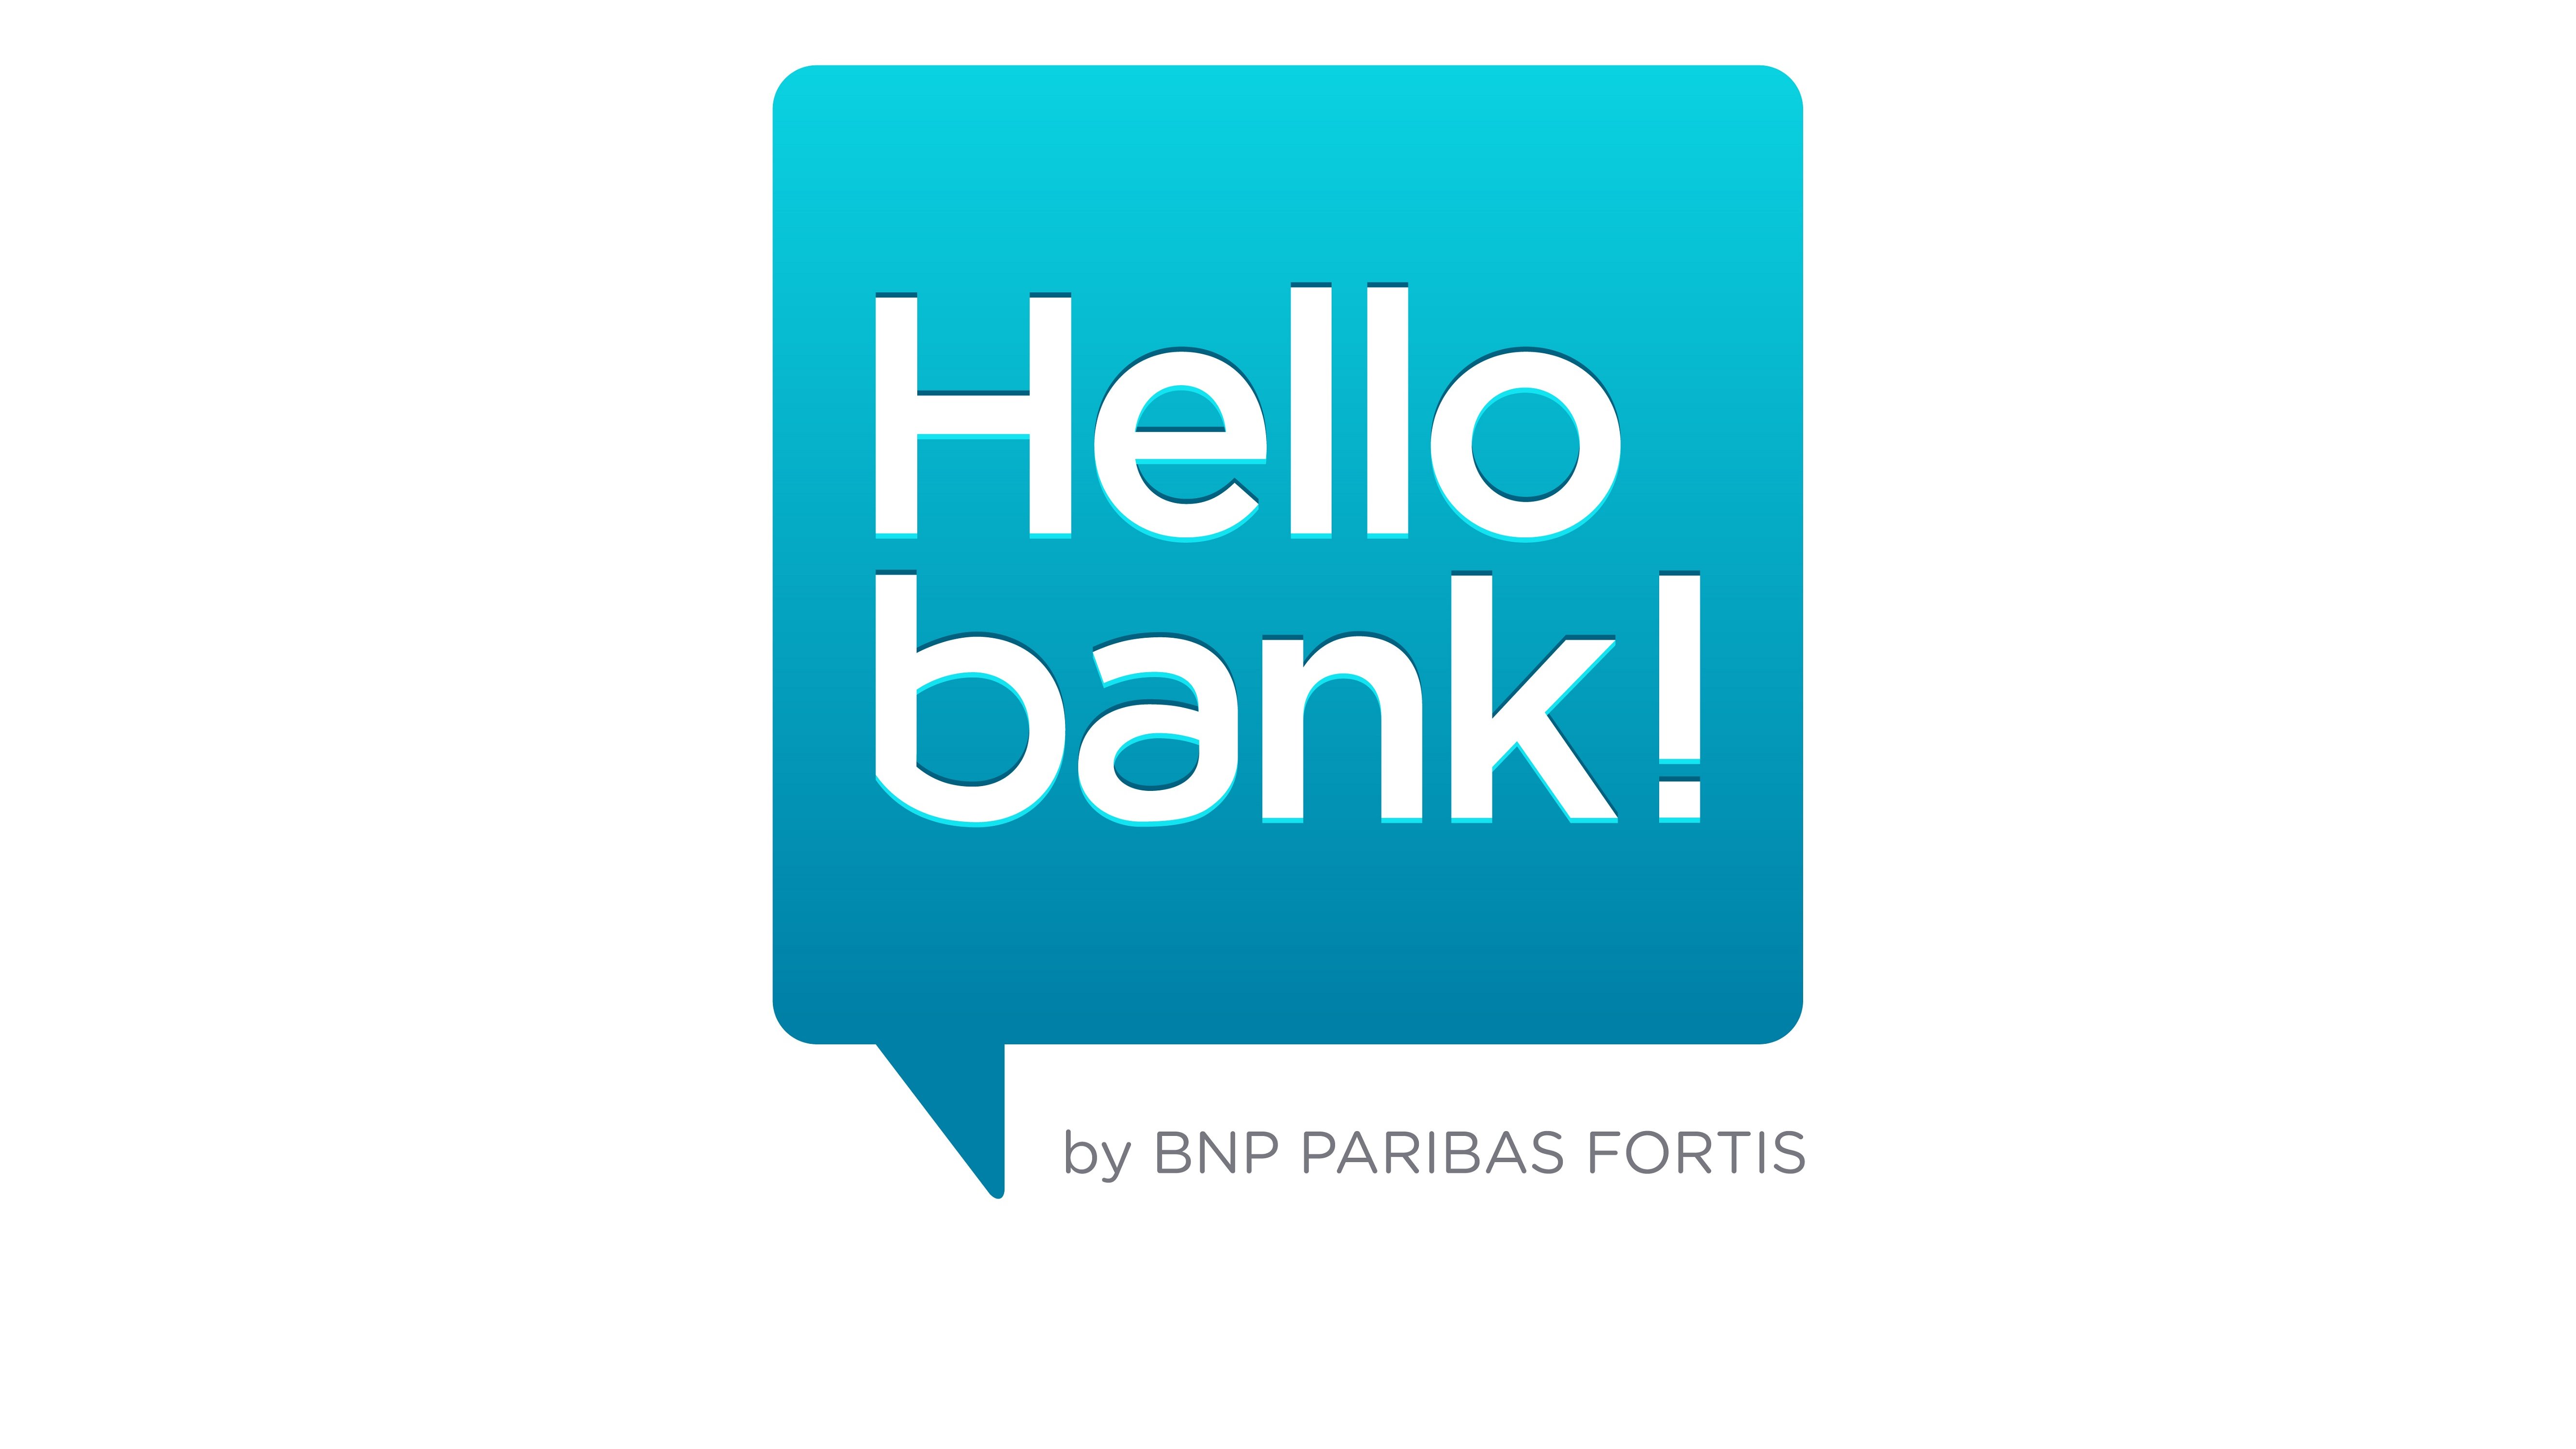 The BNP Paribas Group launches Hello bank!, the first 100% digital ...